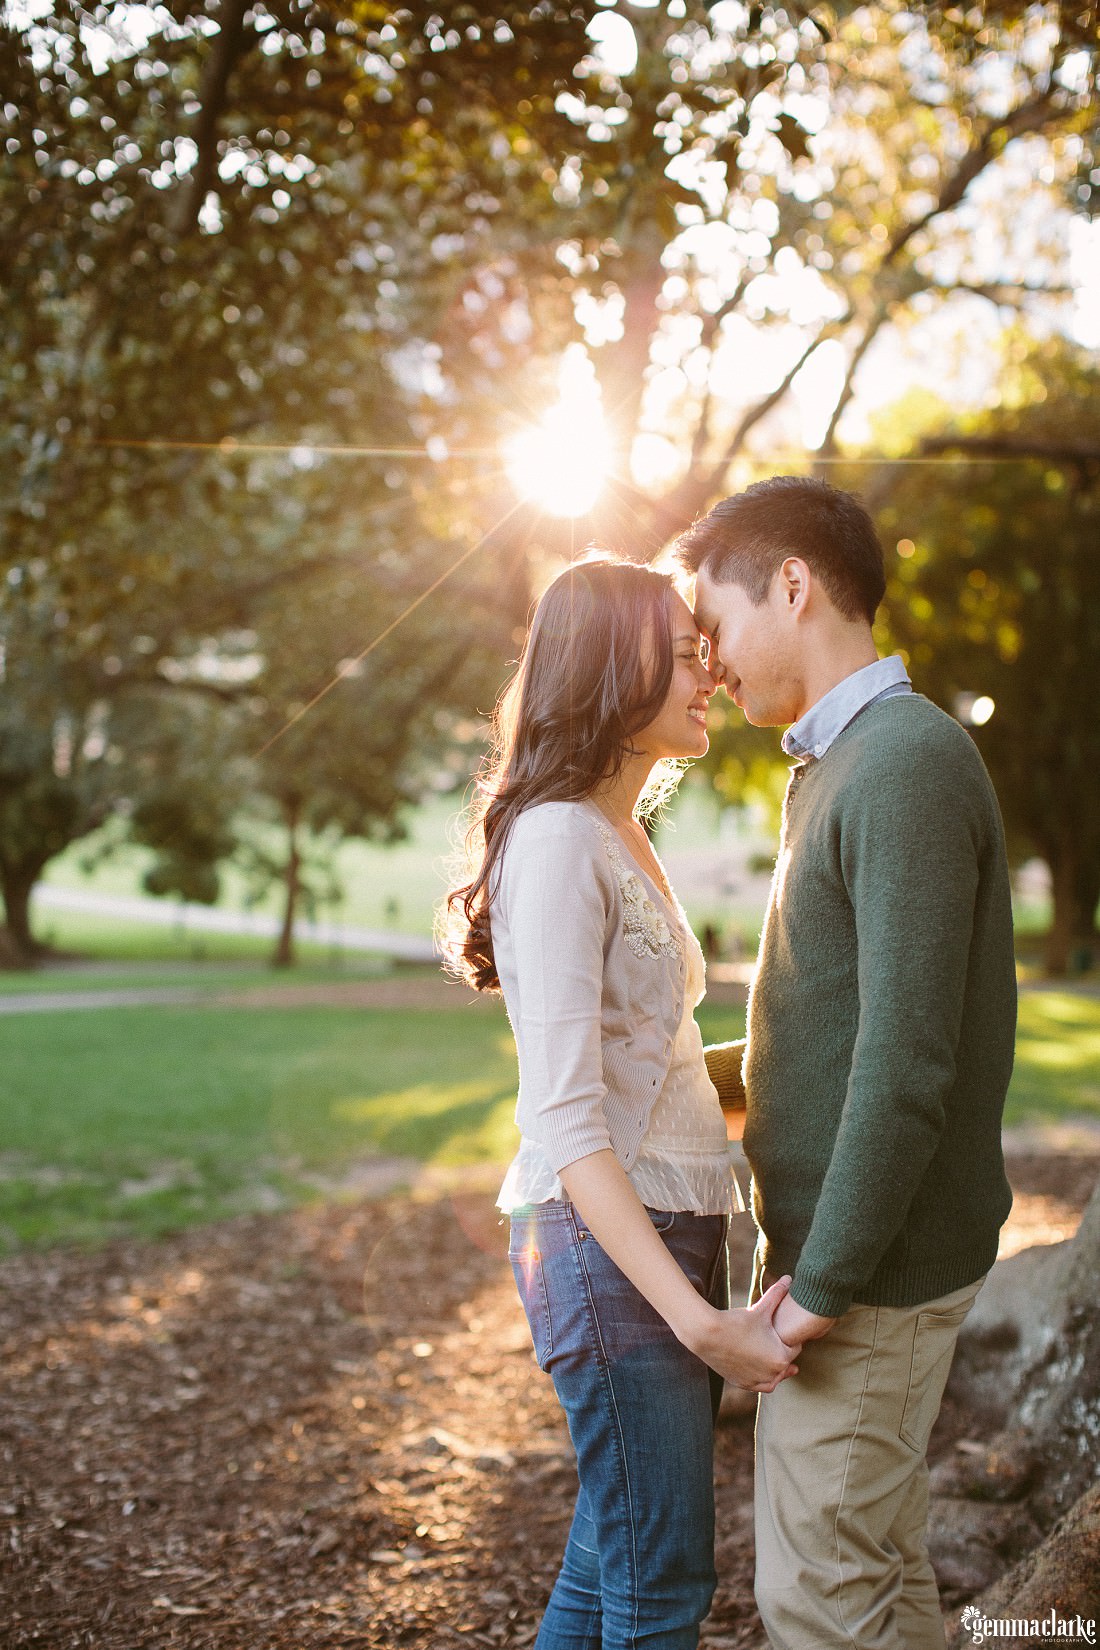 A man and woman holding hands and sharing an eskimo kiss as sunlight streams in through trees in the background - Botanic Gardens Engagement Photos